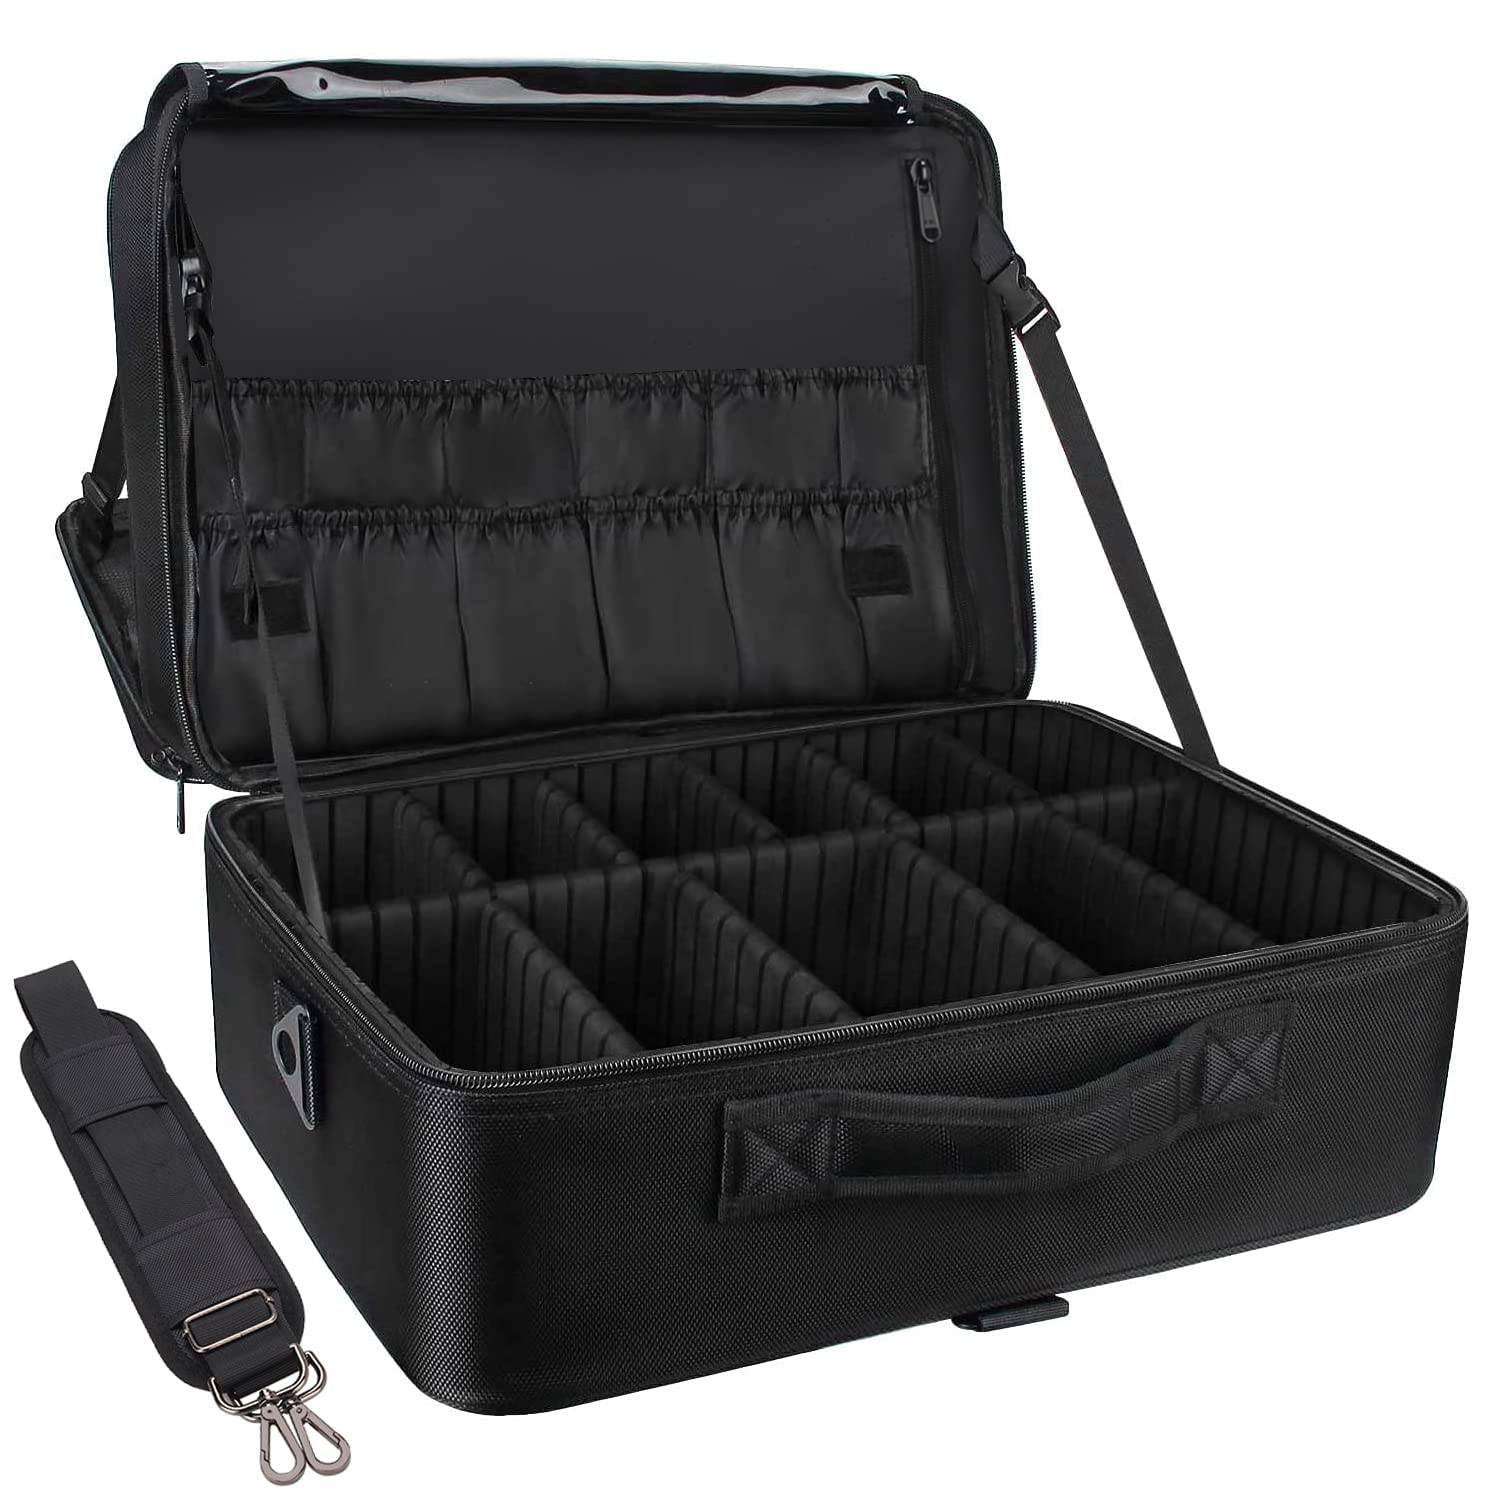 Relavel Extra Large Makeup Case Travel